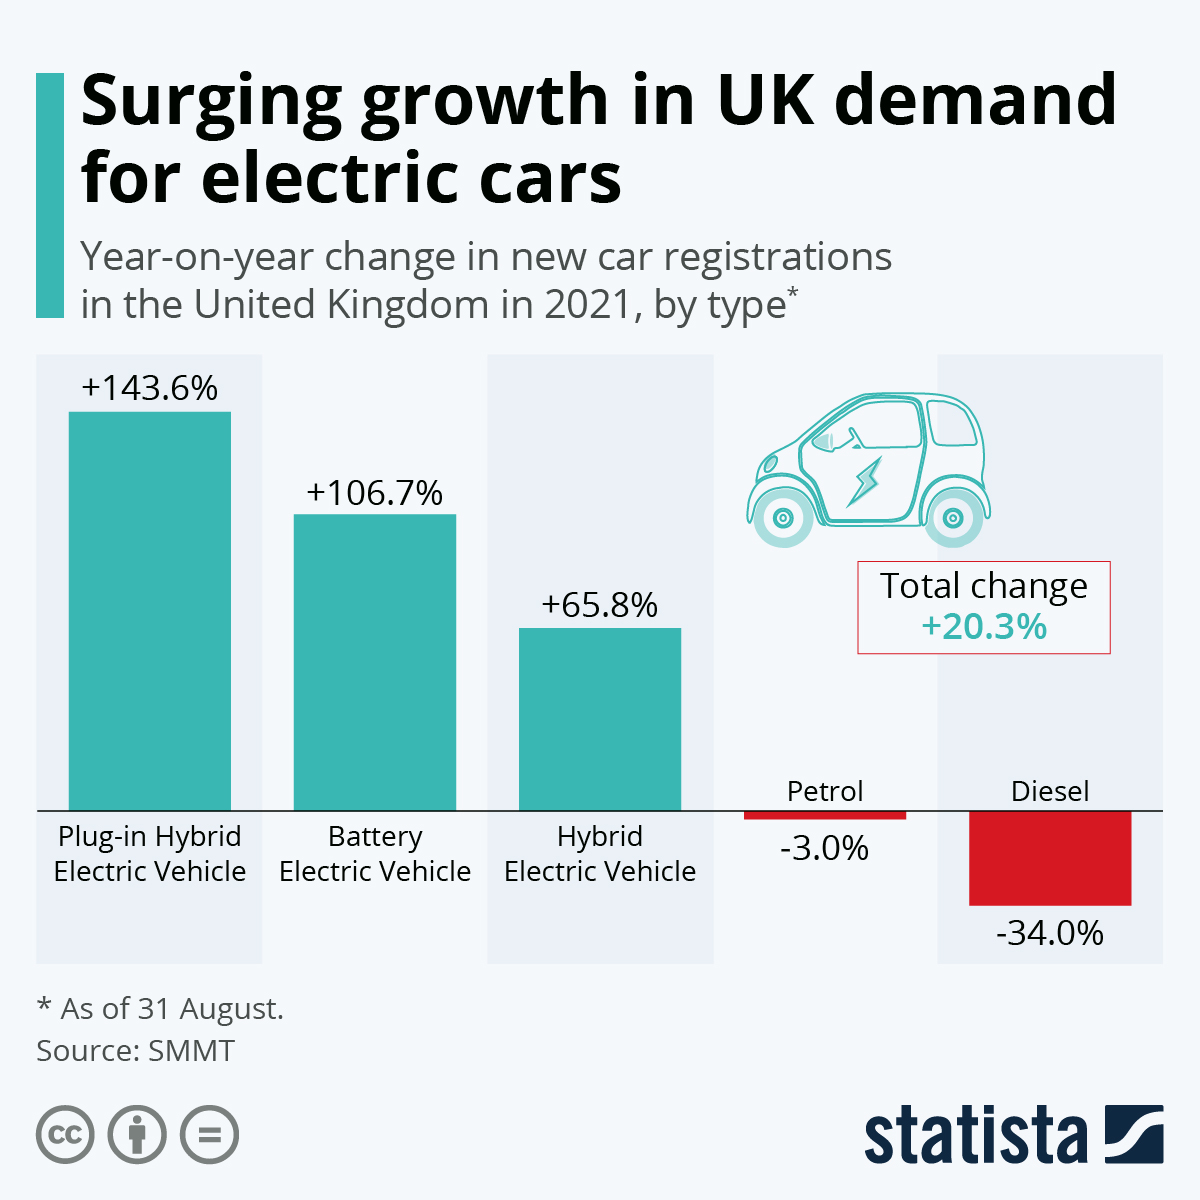 Surging growth in UK demand for electric cars